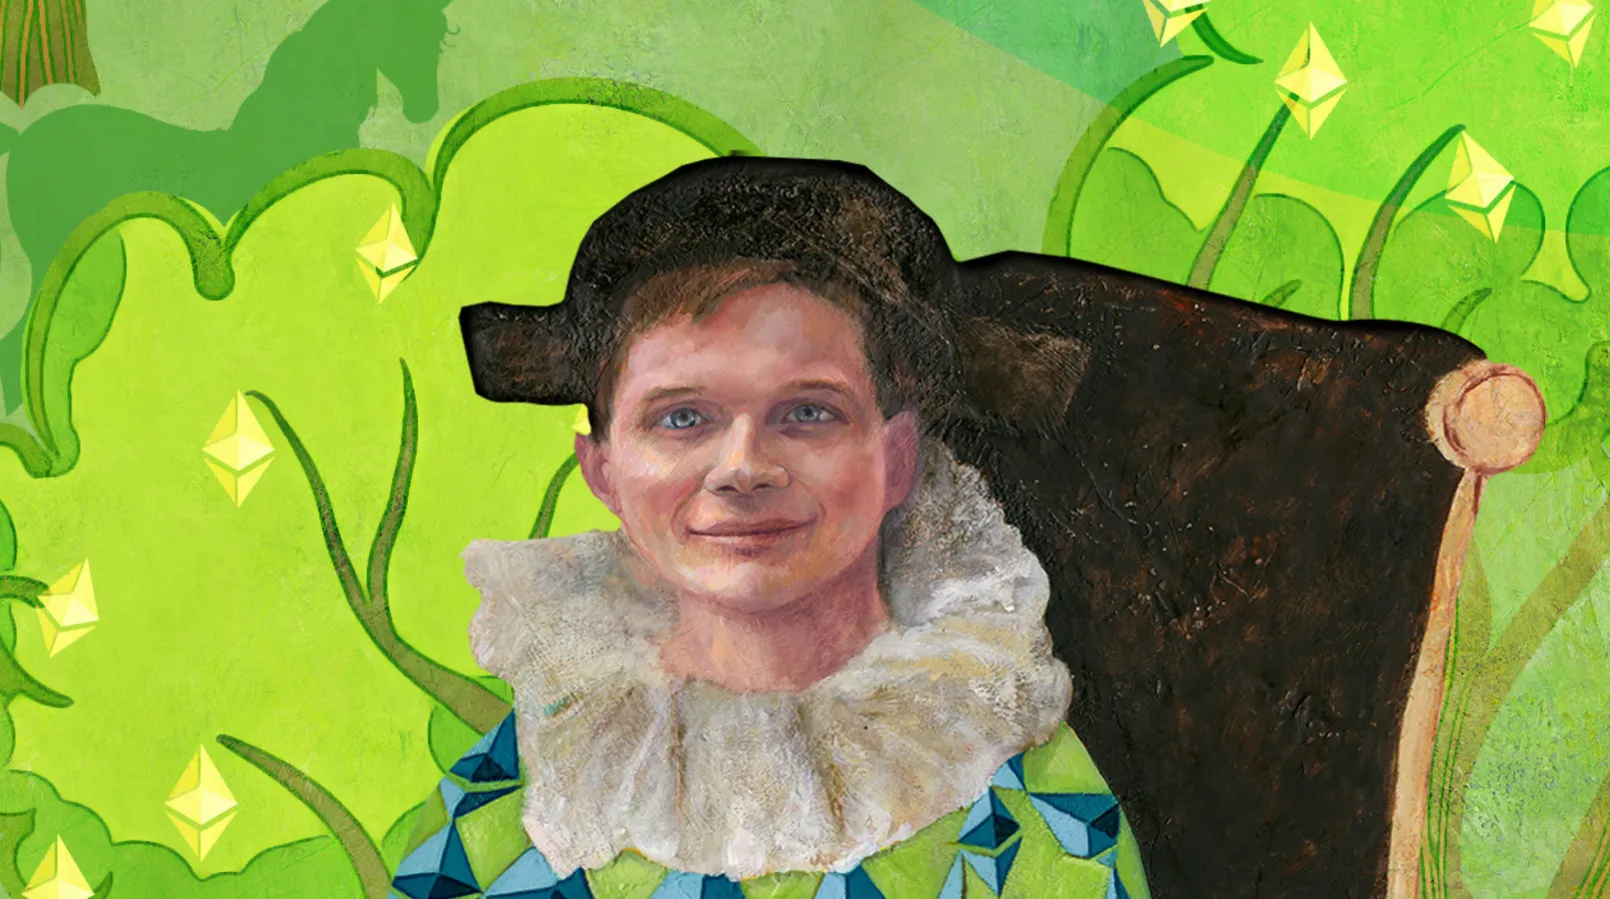 Nft Painting of Buterin.png.jpg